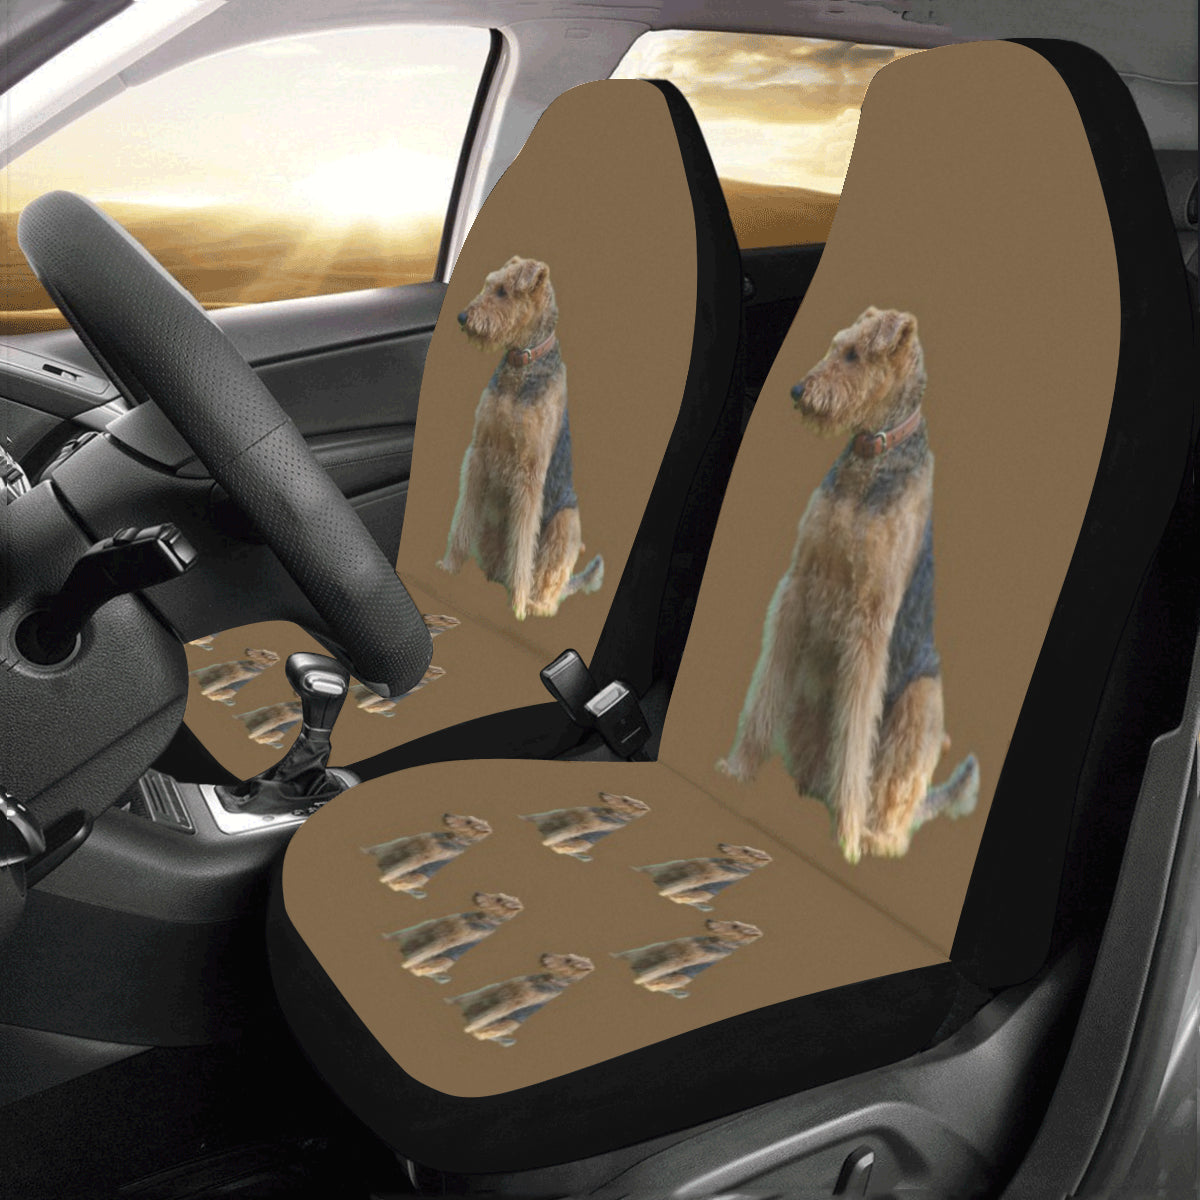 Airedale Terrier Car Seat Covers (Set of 2)